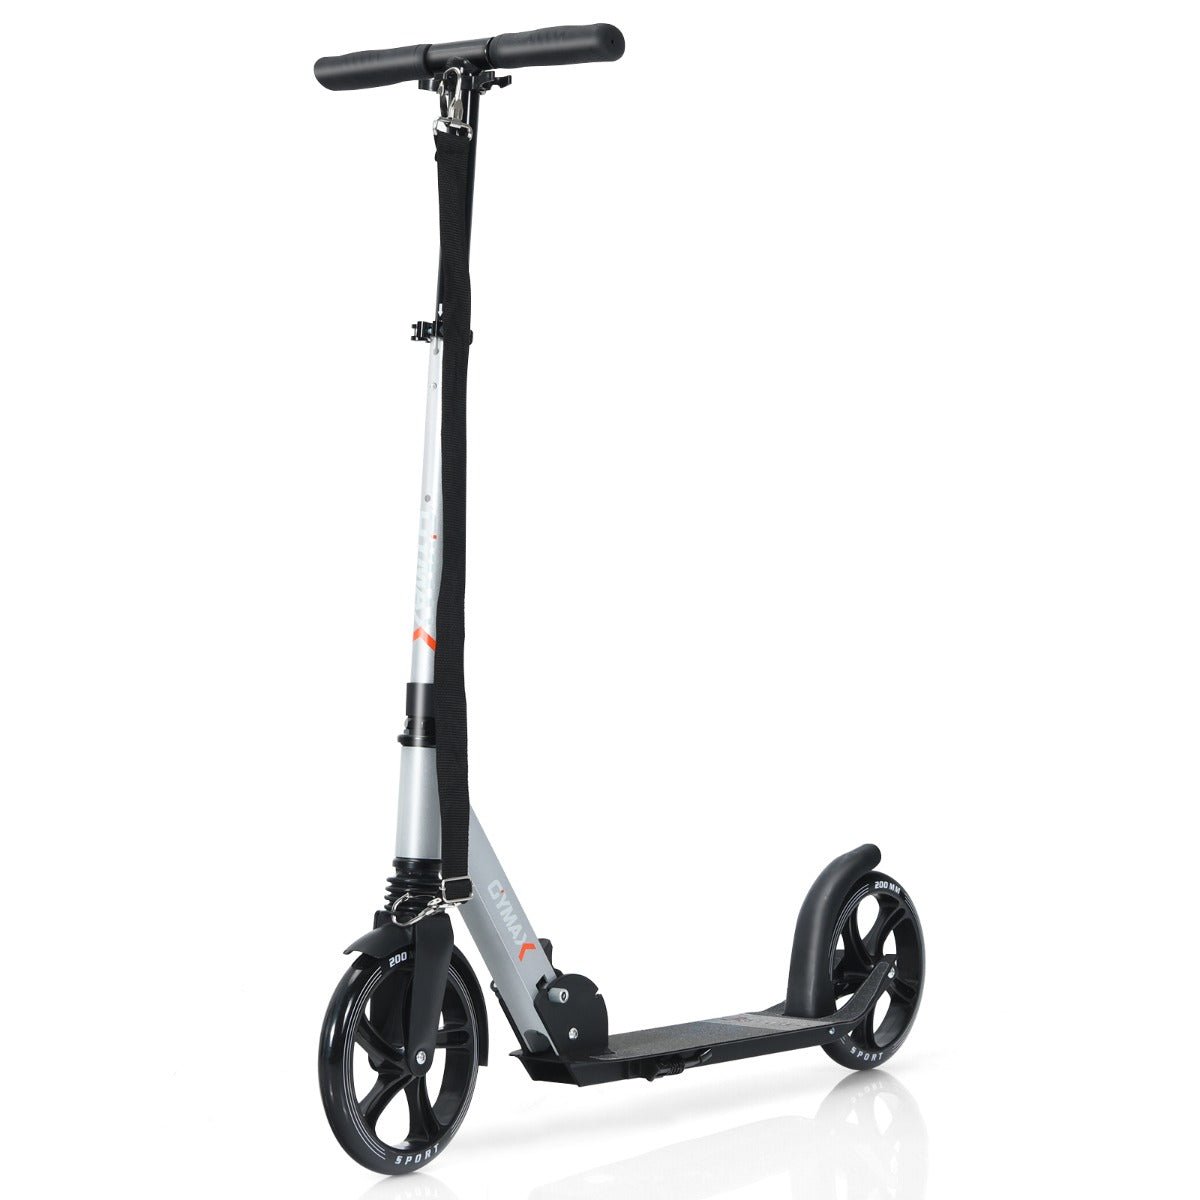 Silver Kids Scooter: Adjustable Height & Anti-Shock Suspension for Smooth Rides